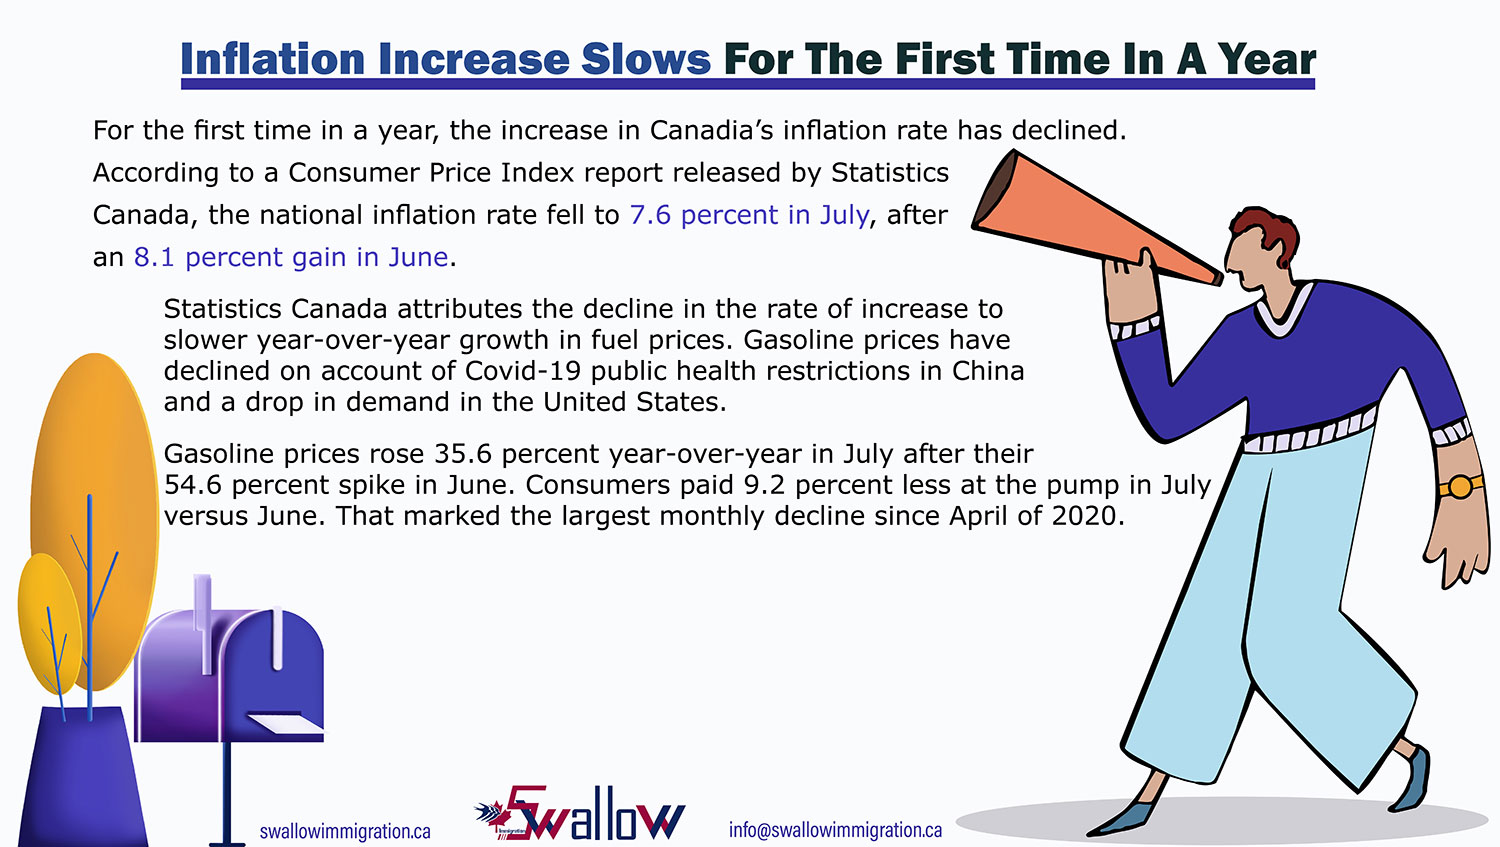 Inflation Increase Slows For The First Time In A Year